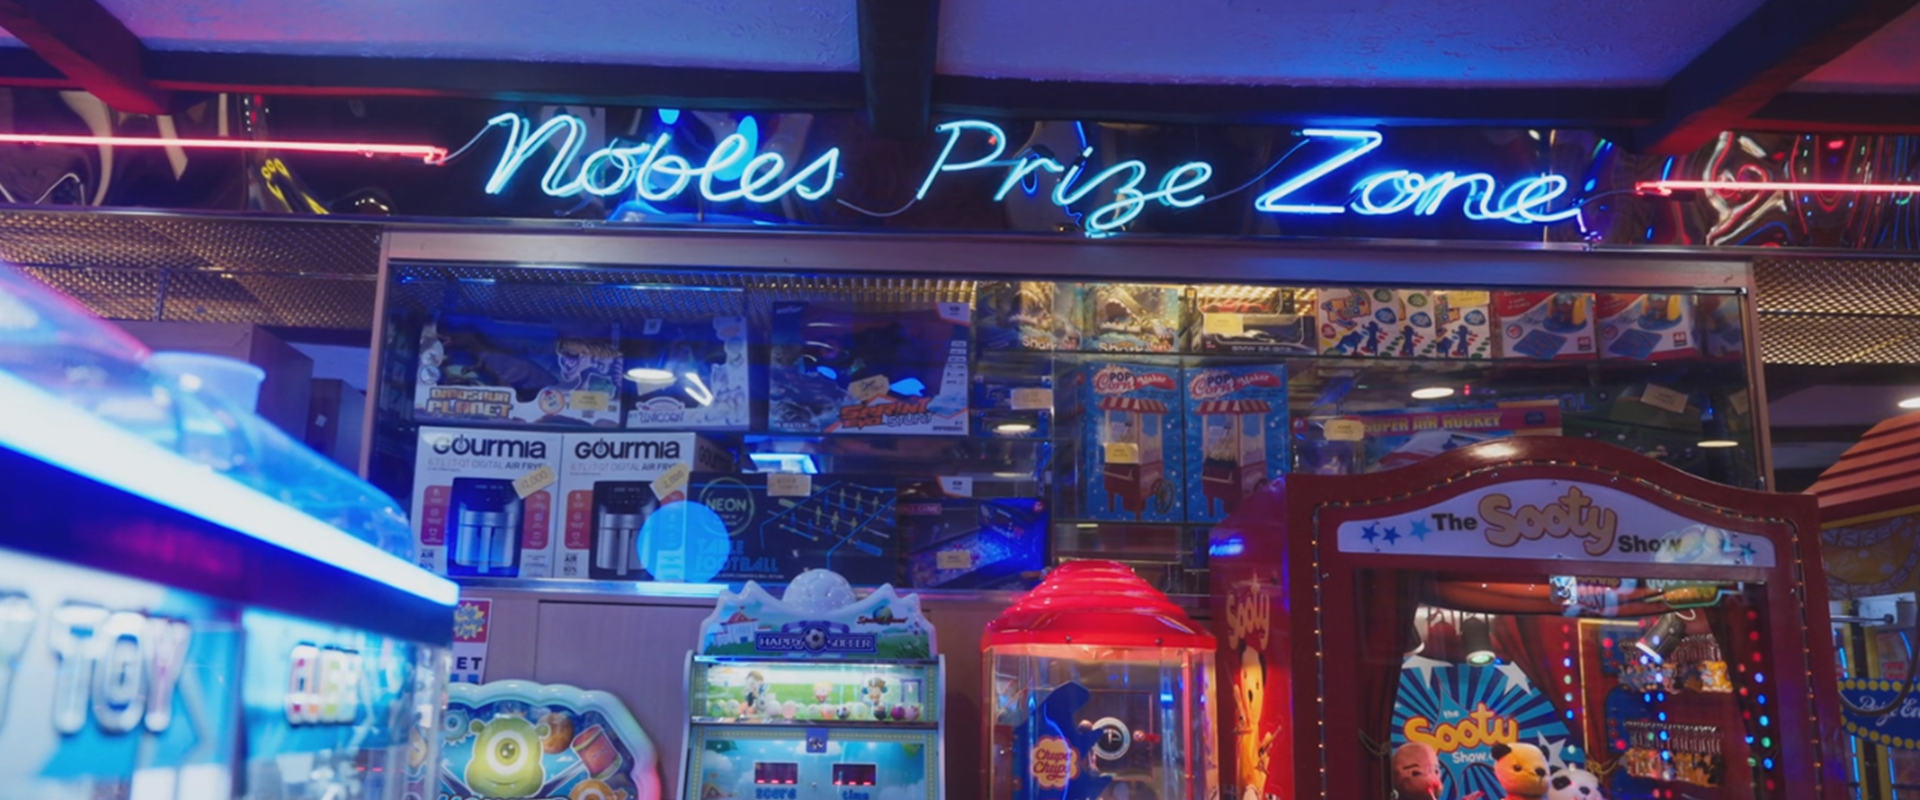 The inside of Nobles Amusements, showing a backdrop of arcade games against a neon blue sign that says 'Nobles Prize Zone'